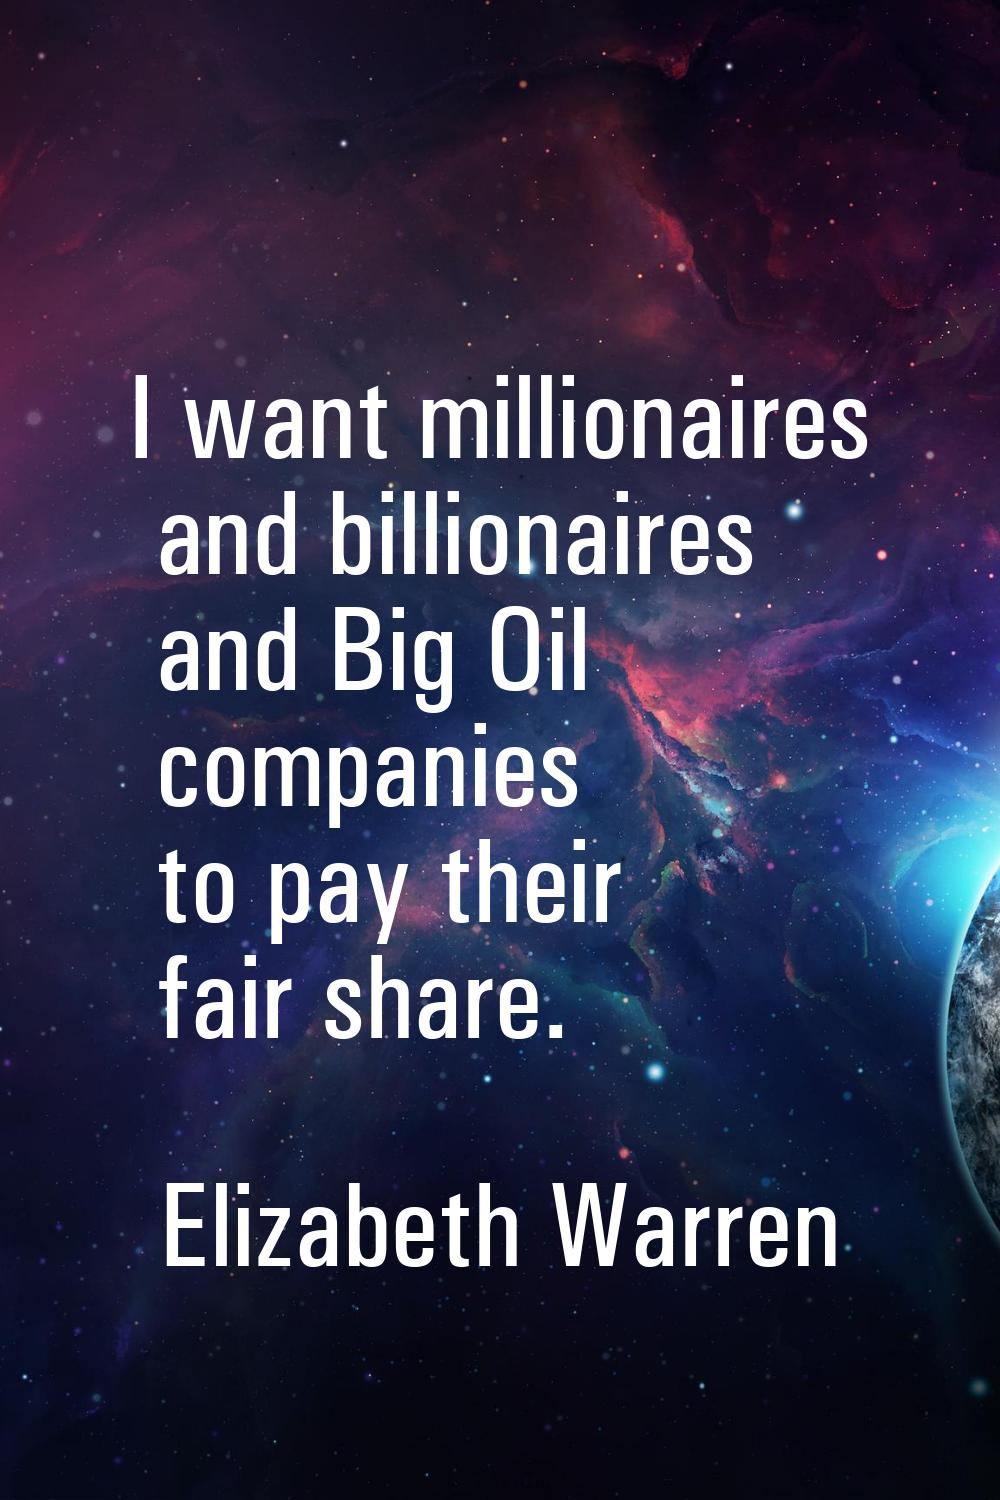 I want millionaires and billionaires and Big Oil companies to pay their fair share.